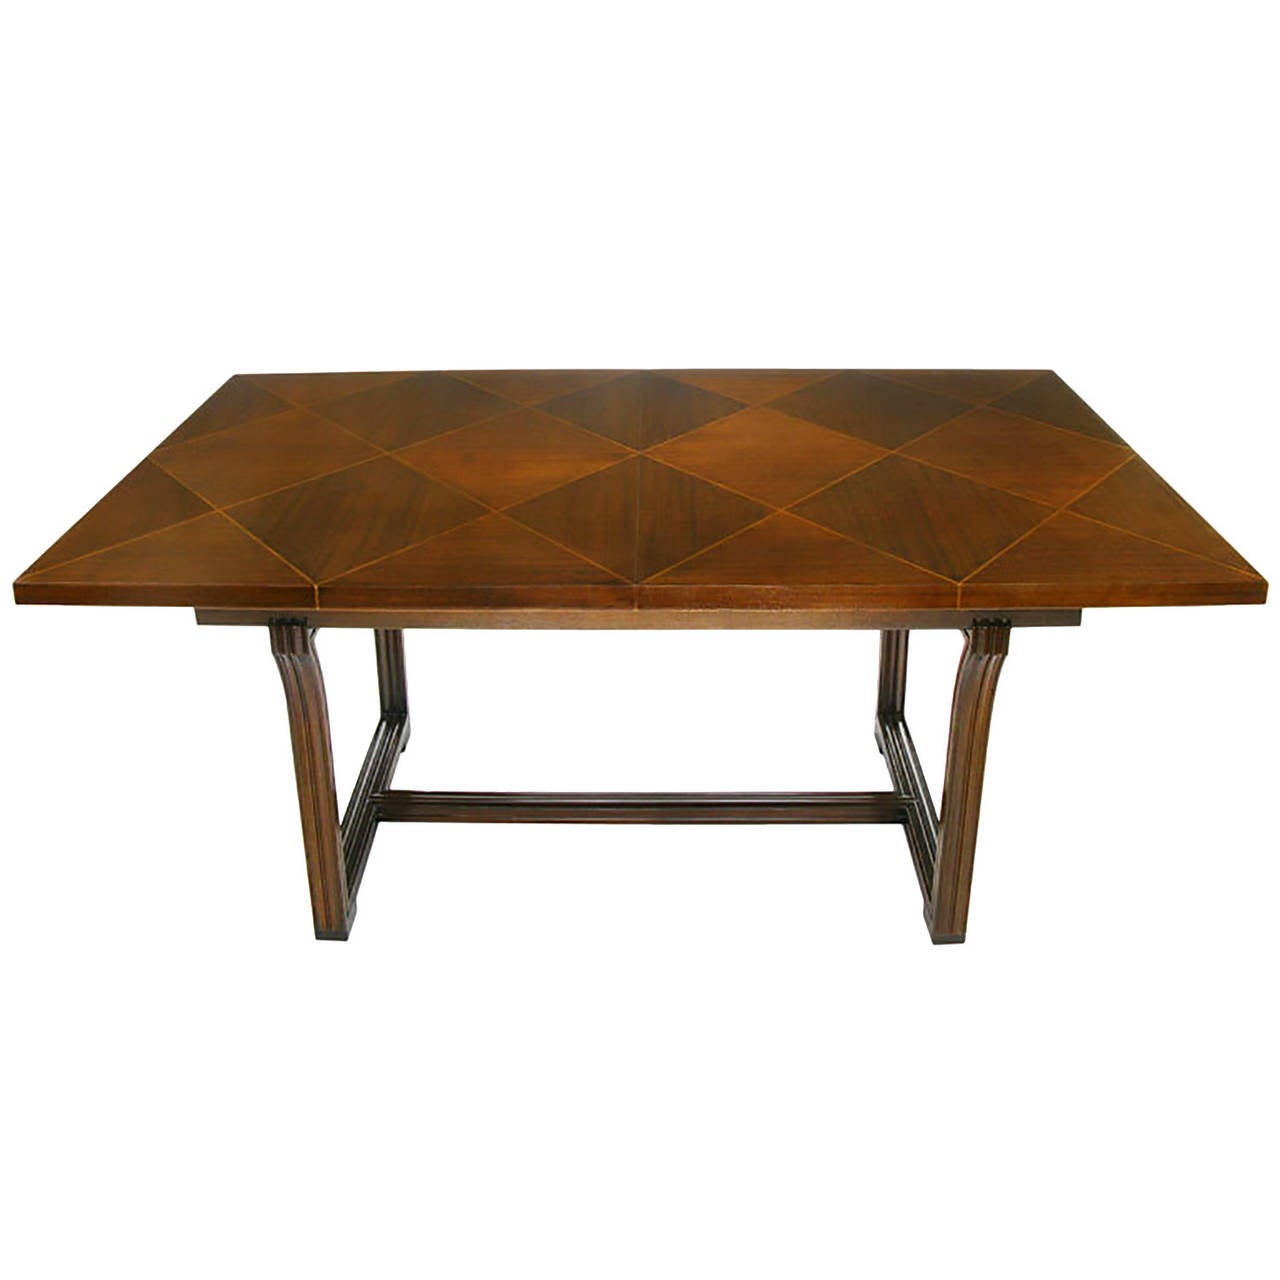 American Rare Tommi Parzinger Parquetry Top Mahogany Dining Table For Sale